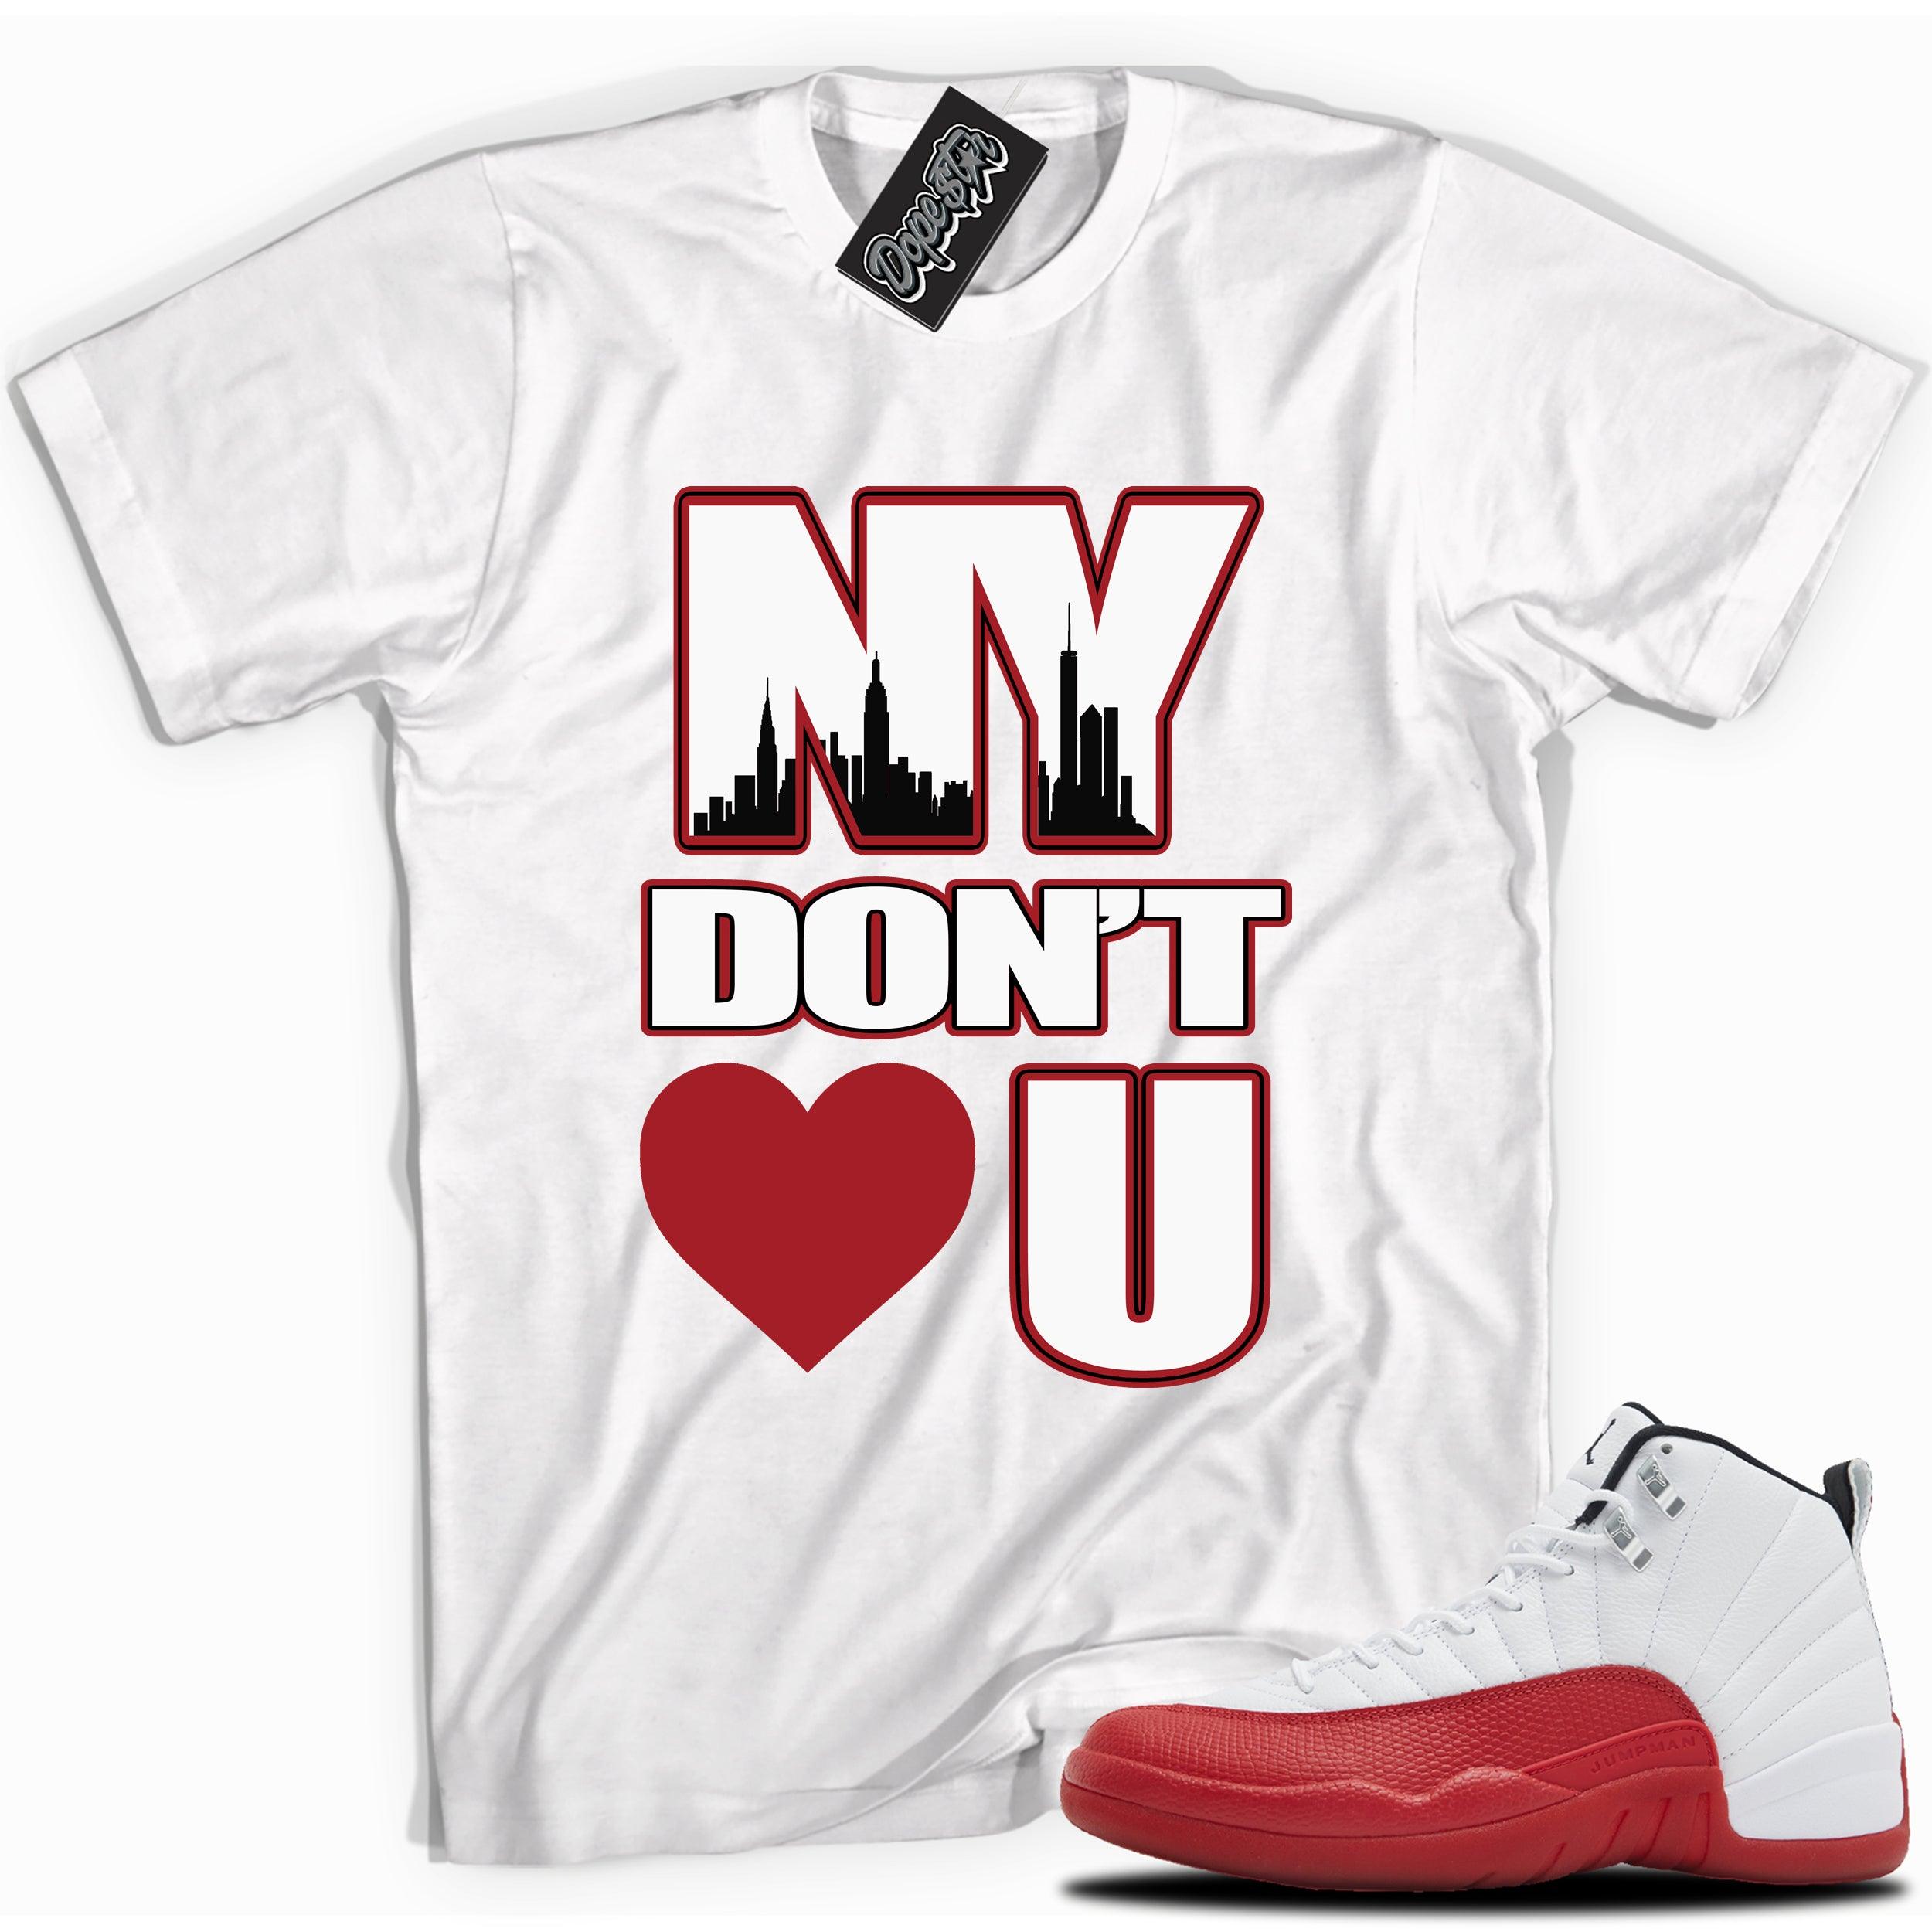 Cool White graphic tee with “NY DONT LOVE YOU” print, that perfectly matches Air Jordan 12 Retro Cherry Red 2023 red and white sneakers 